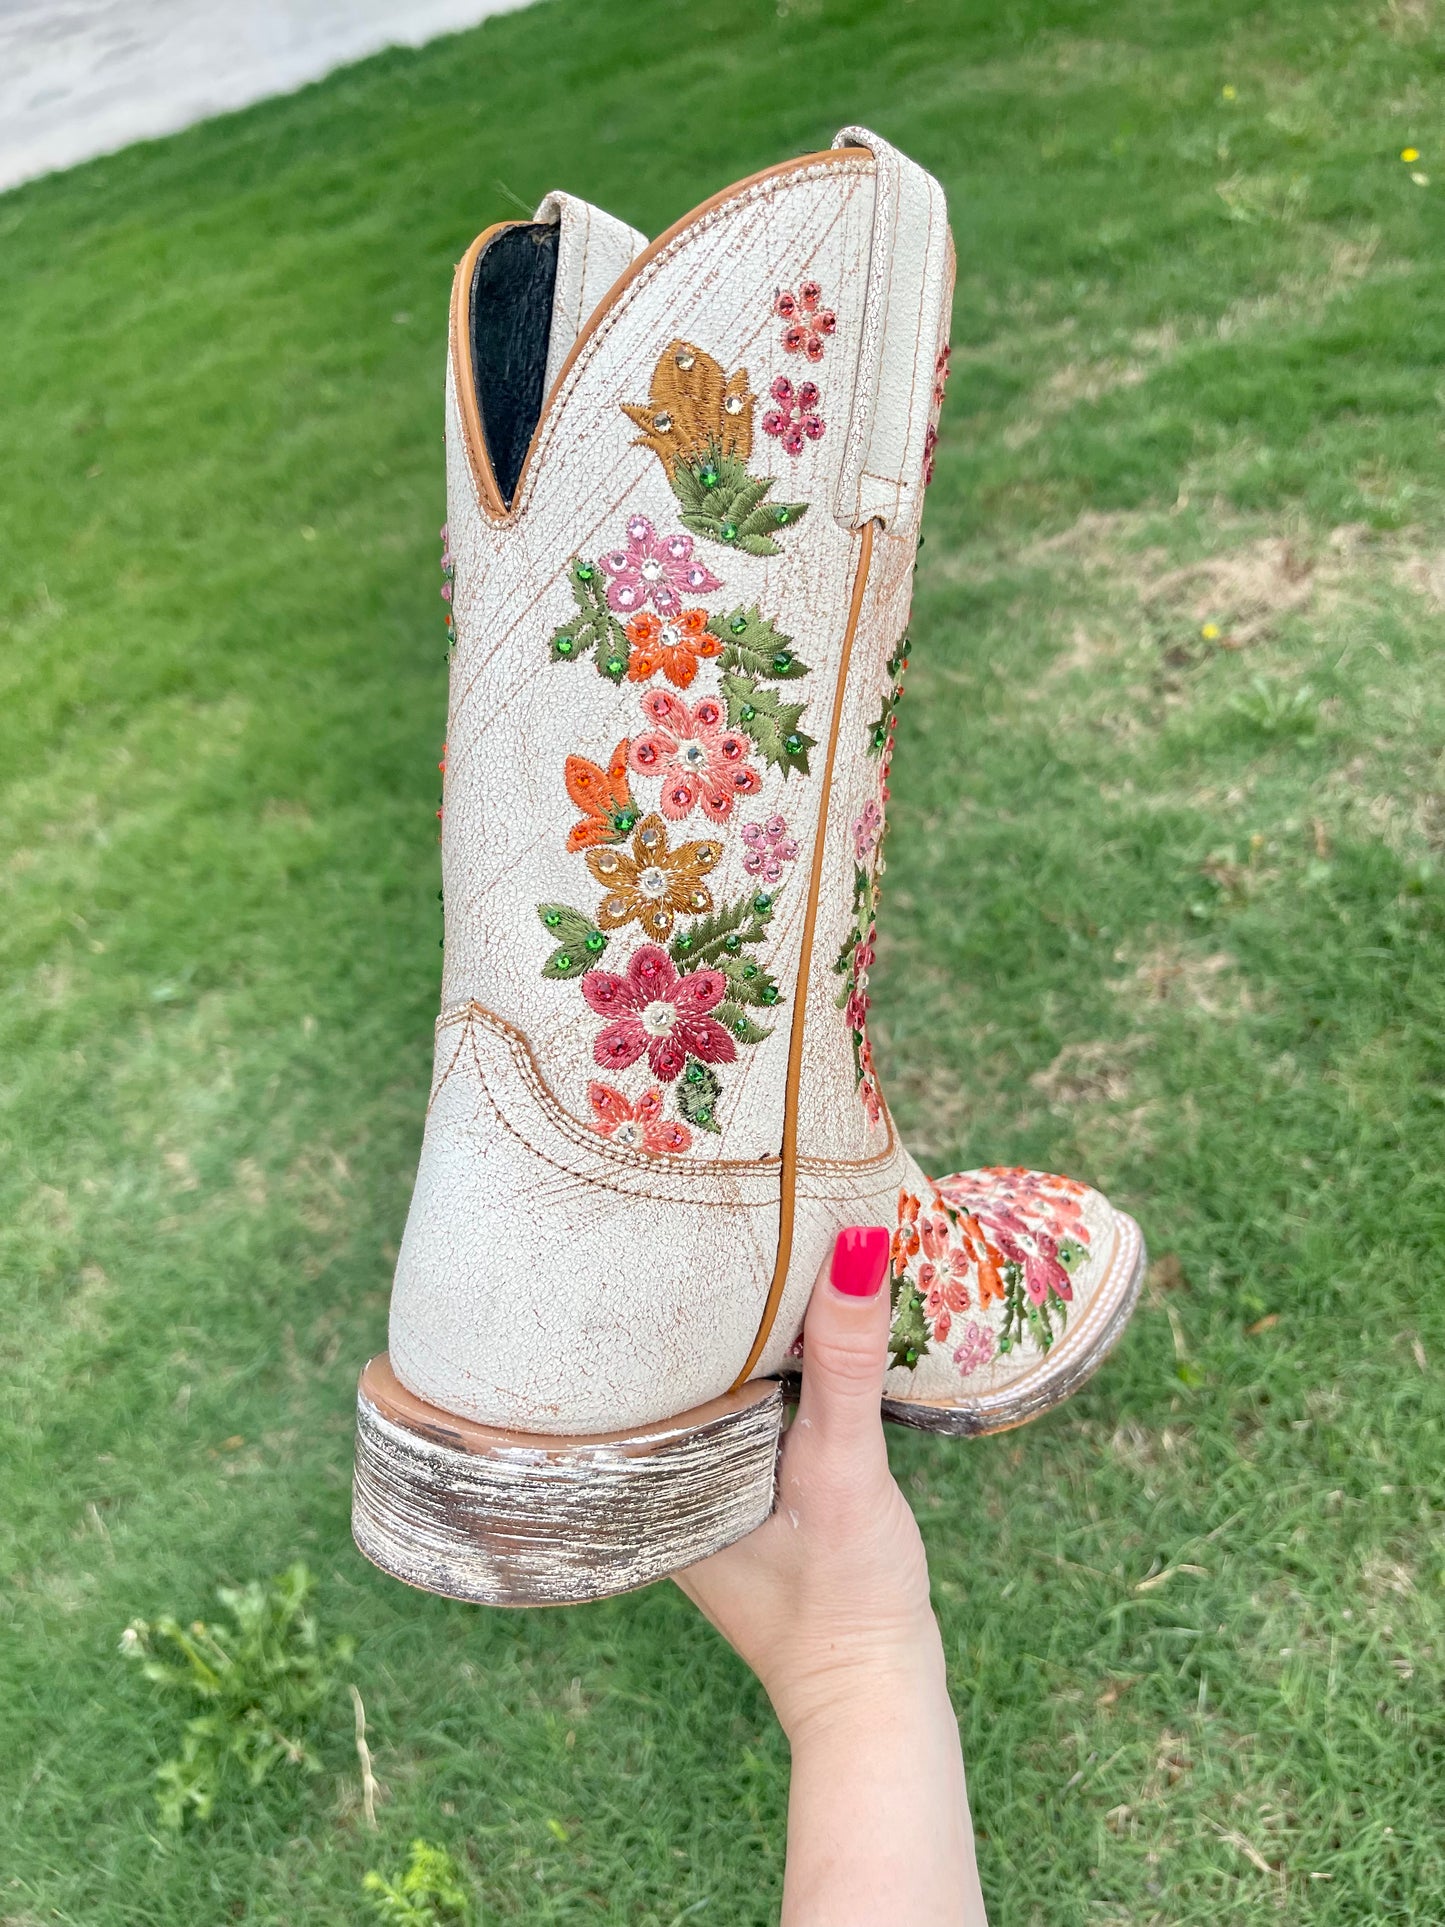 Flowers for Her Boots